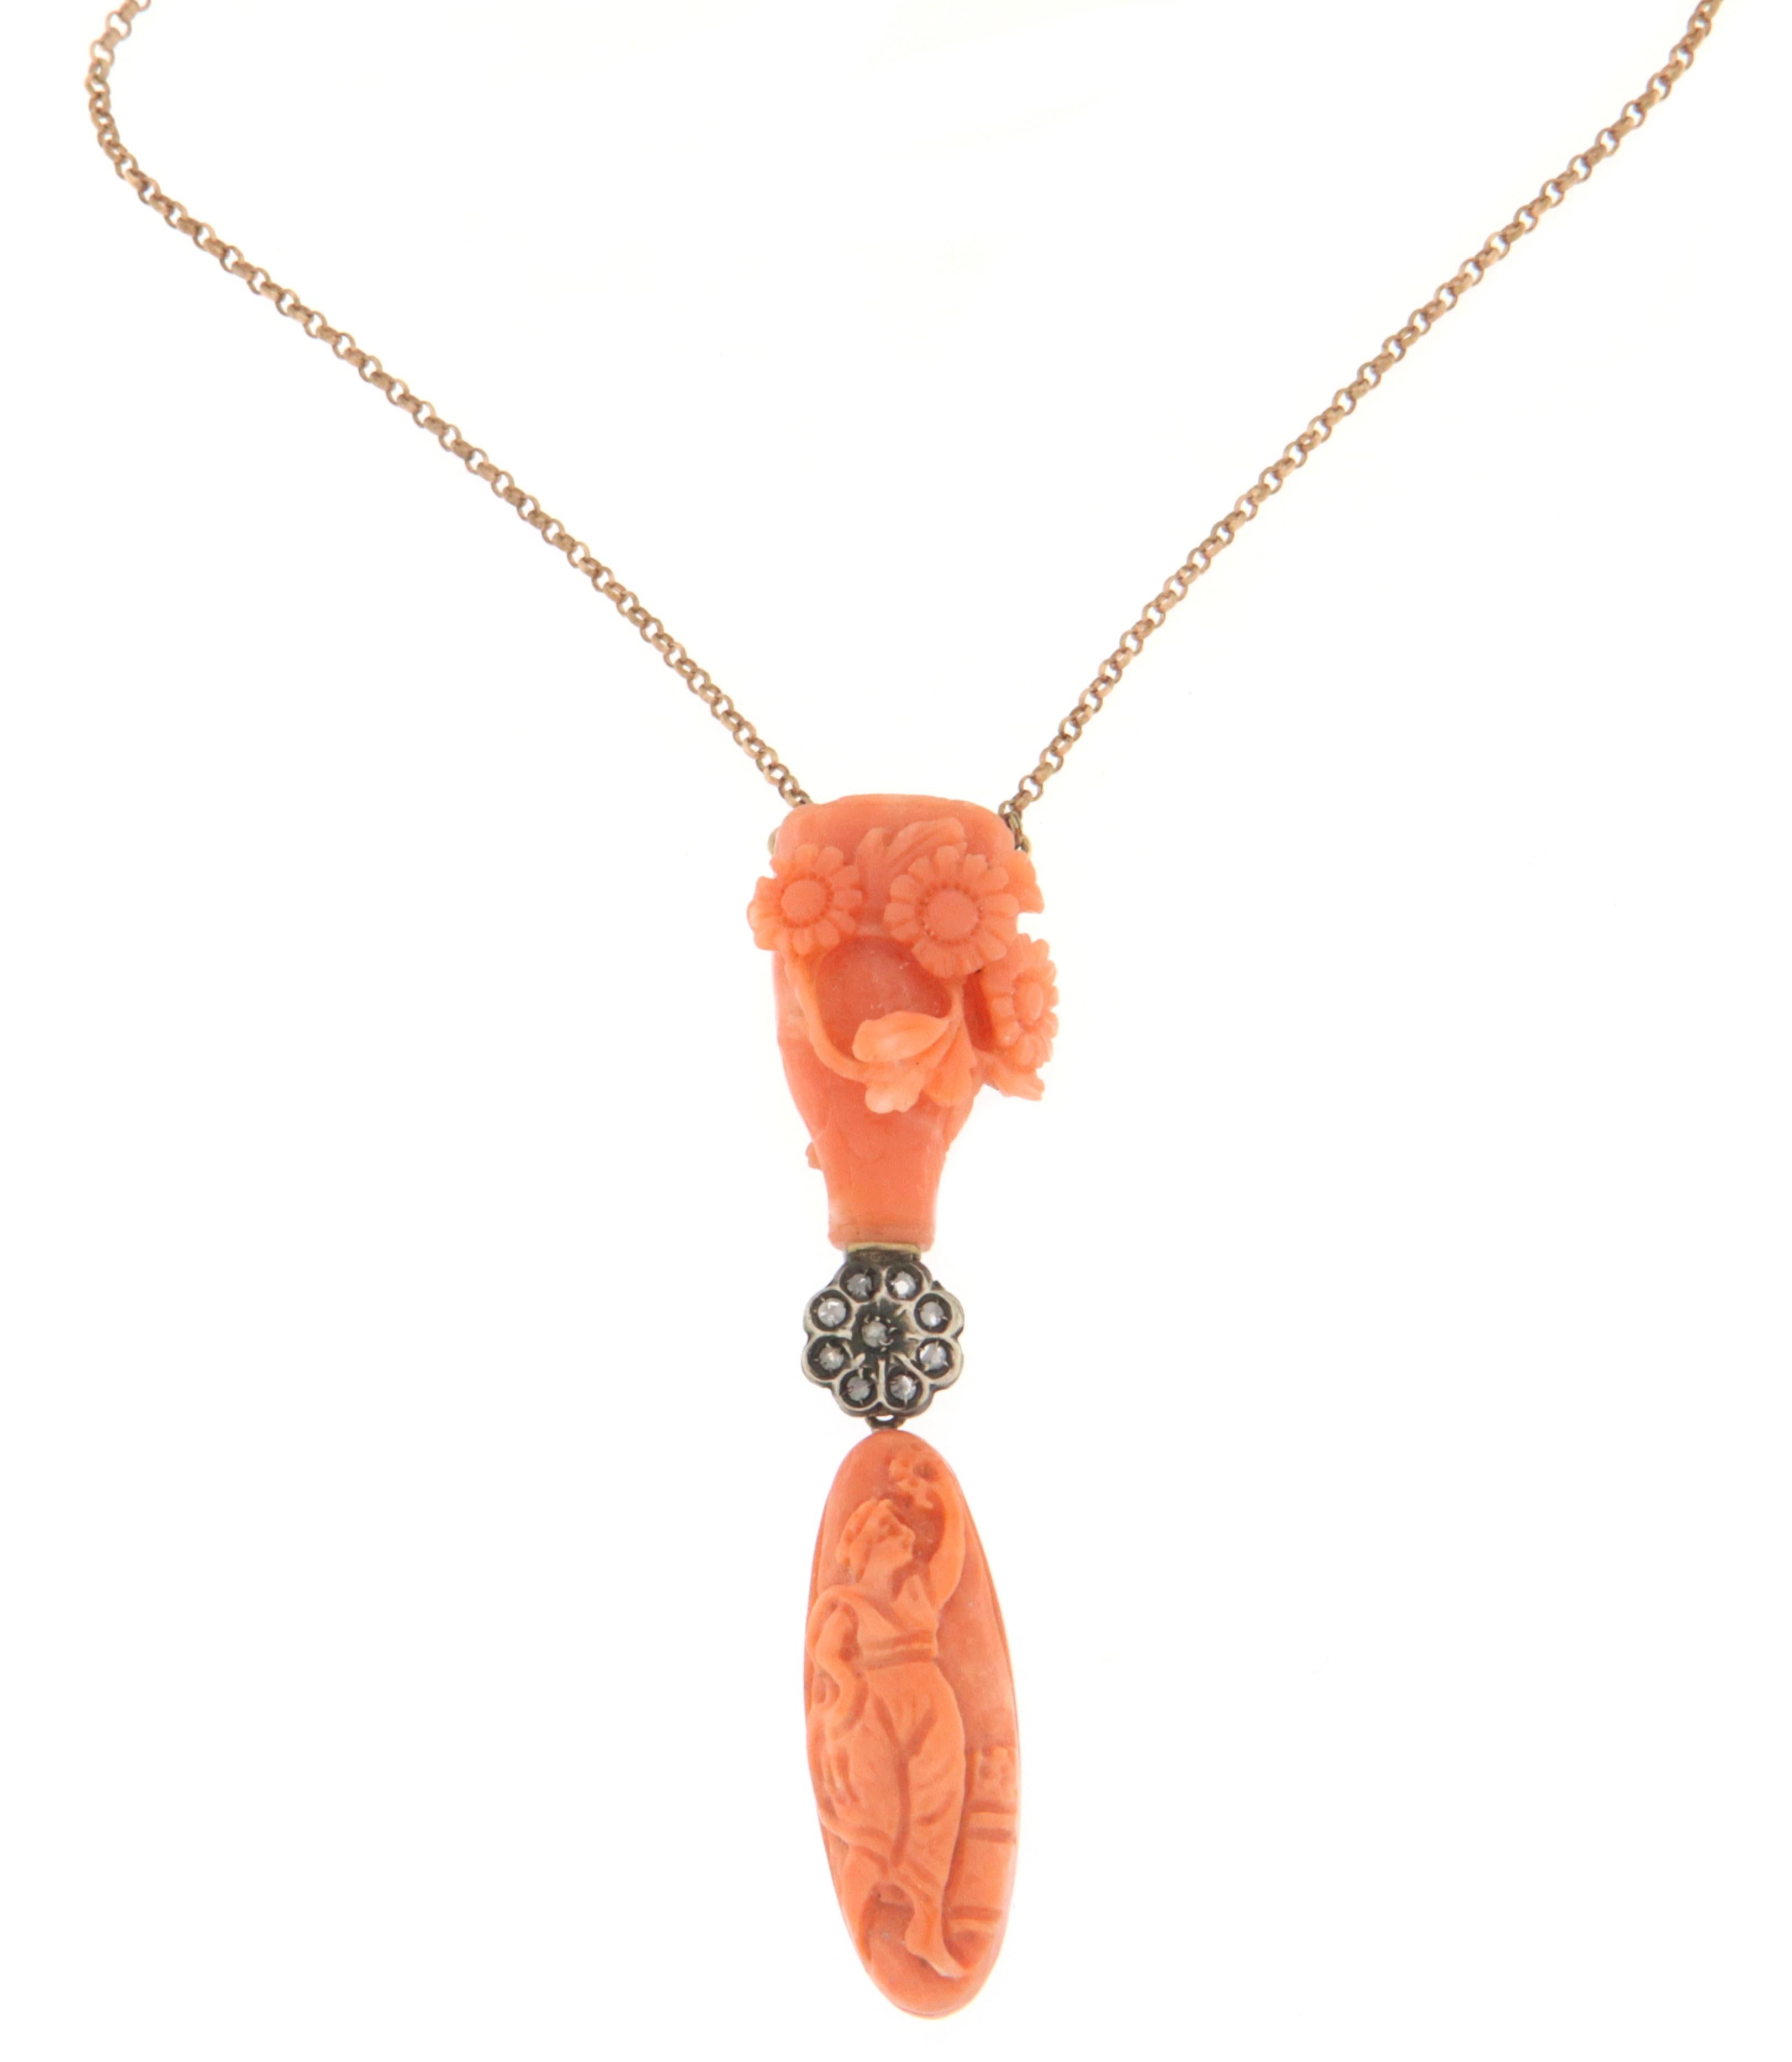 Magnificent necklace made by skilled Neapolitan goldsmiths that recalls the charm of the Baroque era, the jewel made in 14 karat yellow gold and 800 thousandths silver mounted with natural coral and old cut diamonds.

Total Weight of the necklace